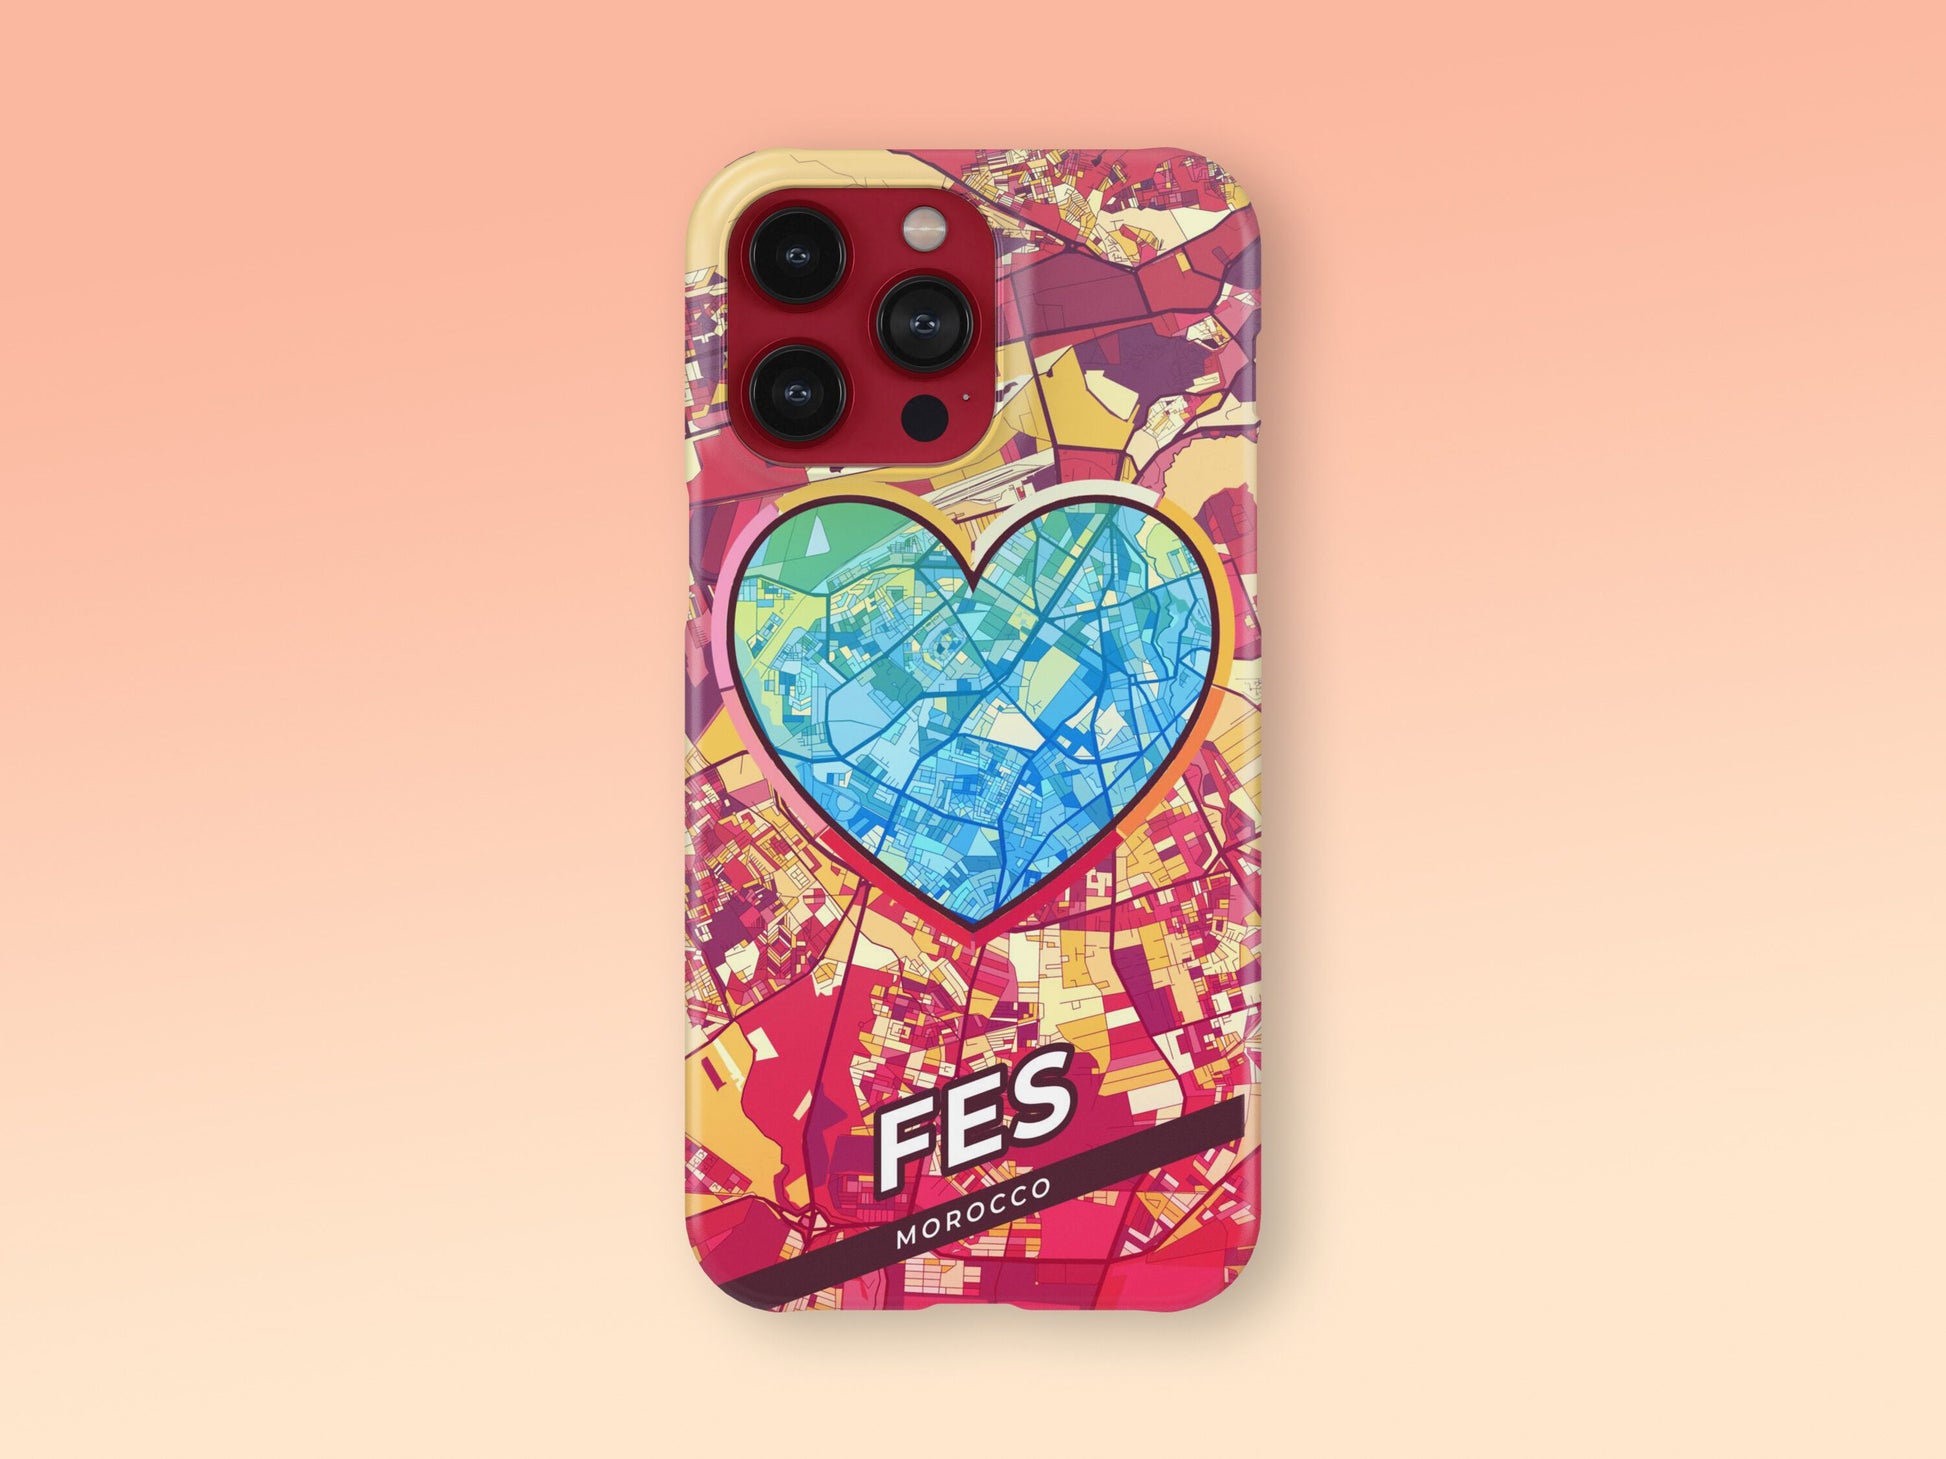 Fes Morocco slim phone case with colorful icon. Birthday, wedding or housewarming gift. Couple match cases. 2